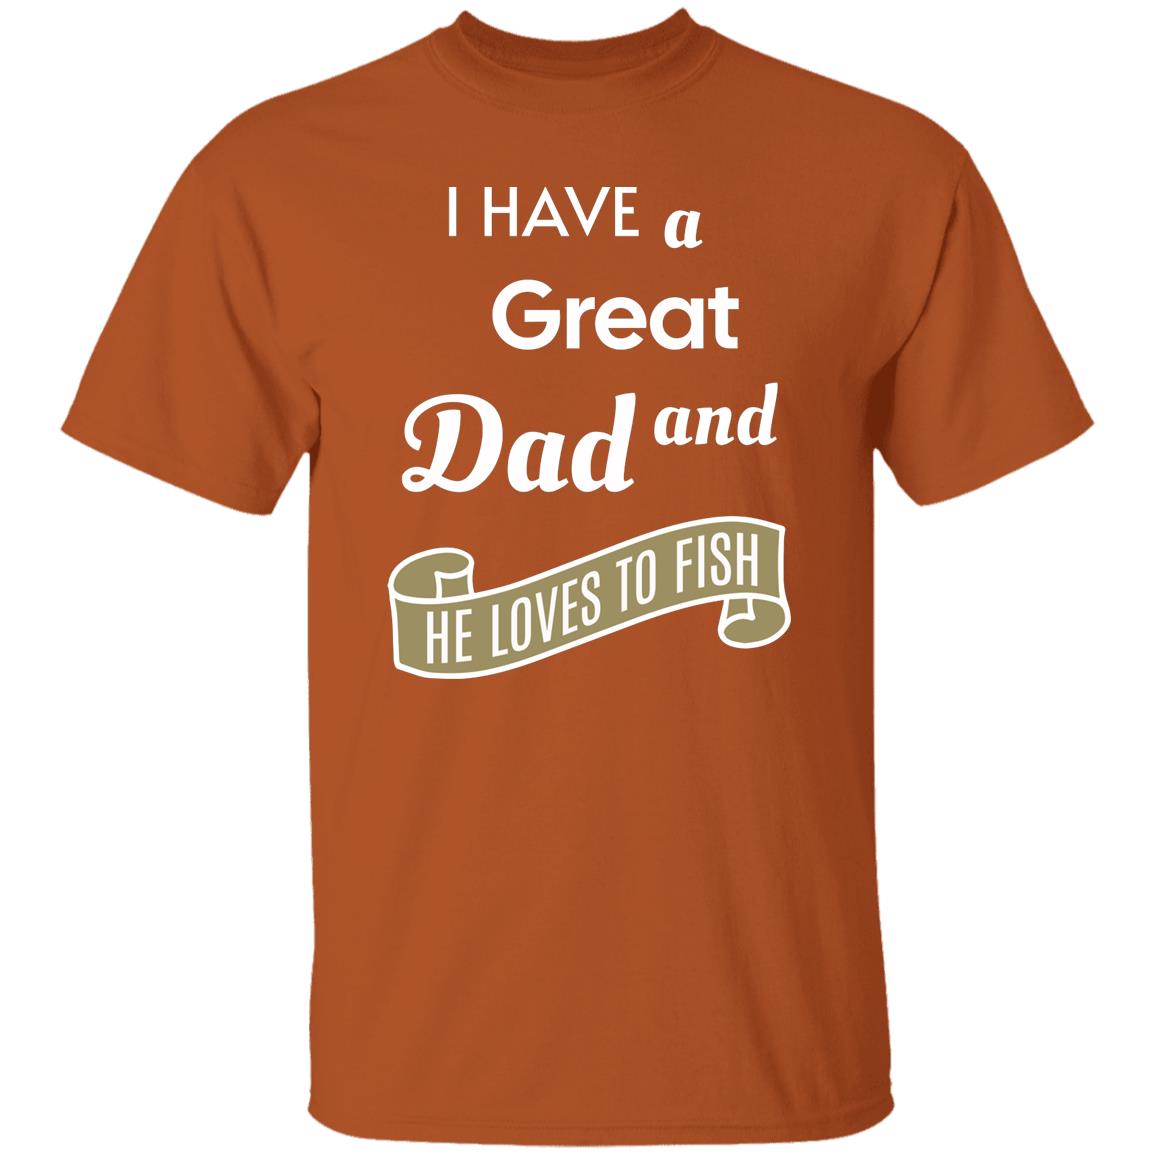 I have a great dad and he loves fishing k t-shirt texas-orange